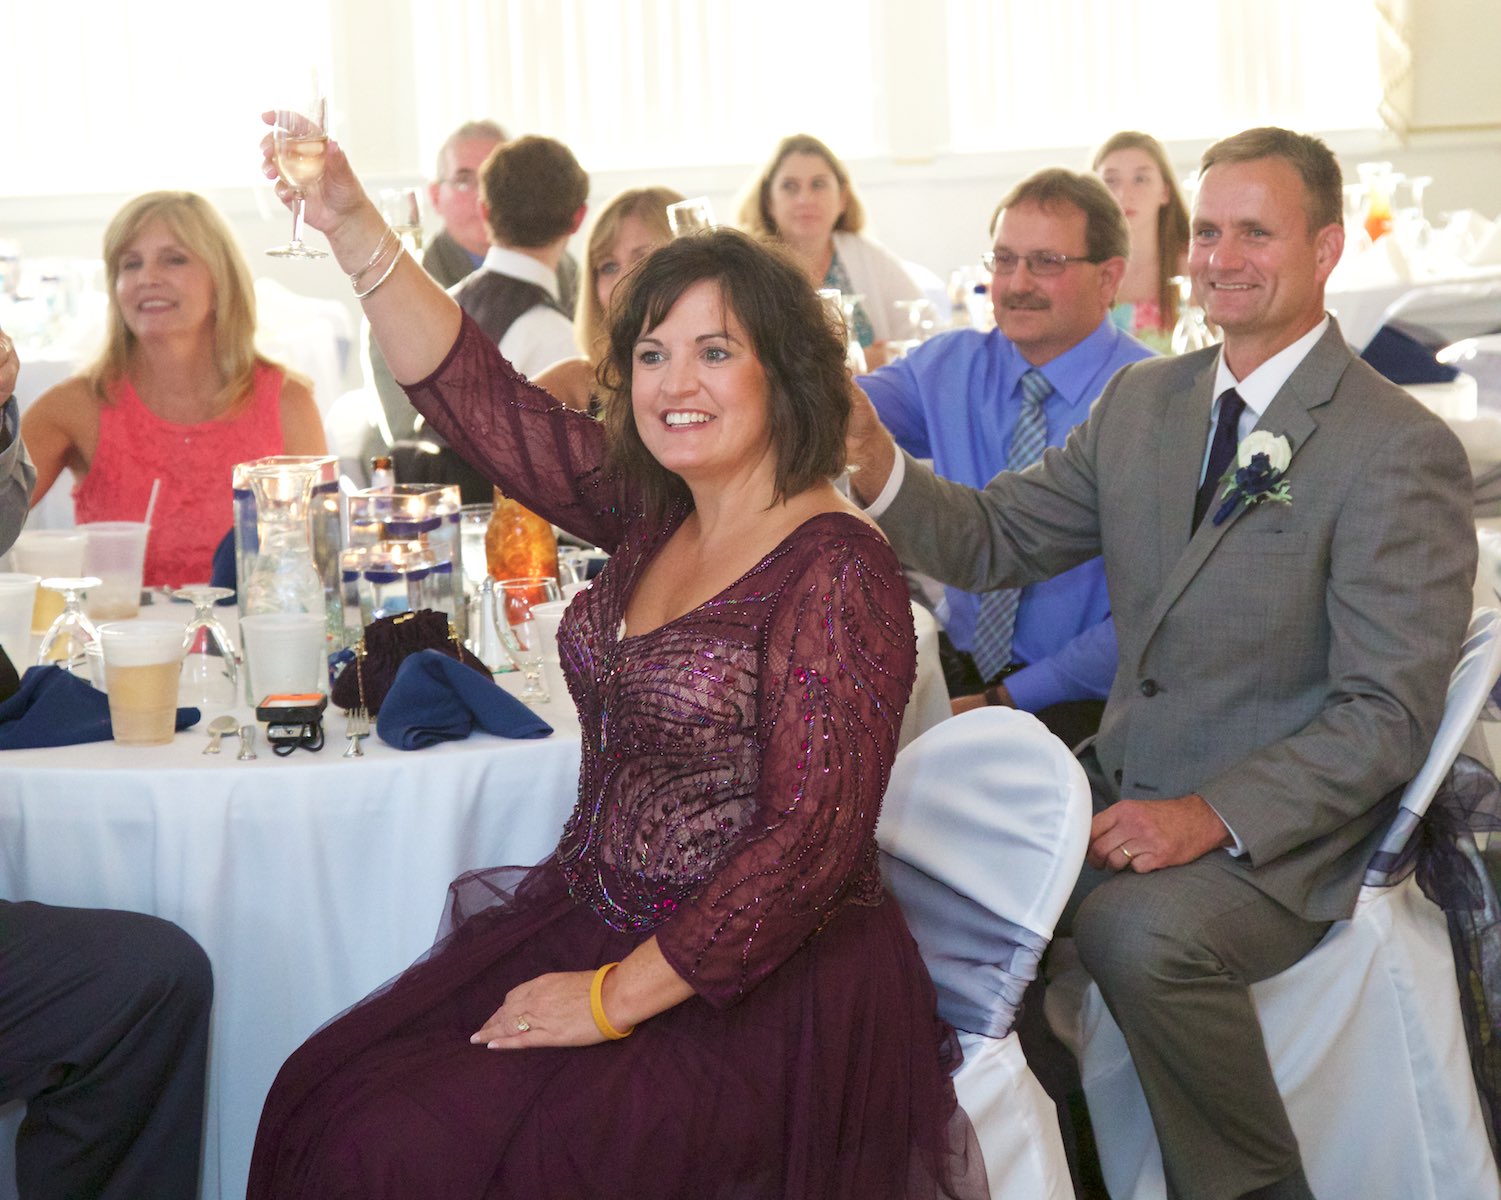 Family and friends raise their glasses for toast, wedding reception at Hamilton's 110 North East, Jacksonville, Illinois. Wedding photography by Steve & Tiffany Warmowski.